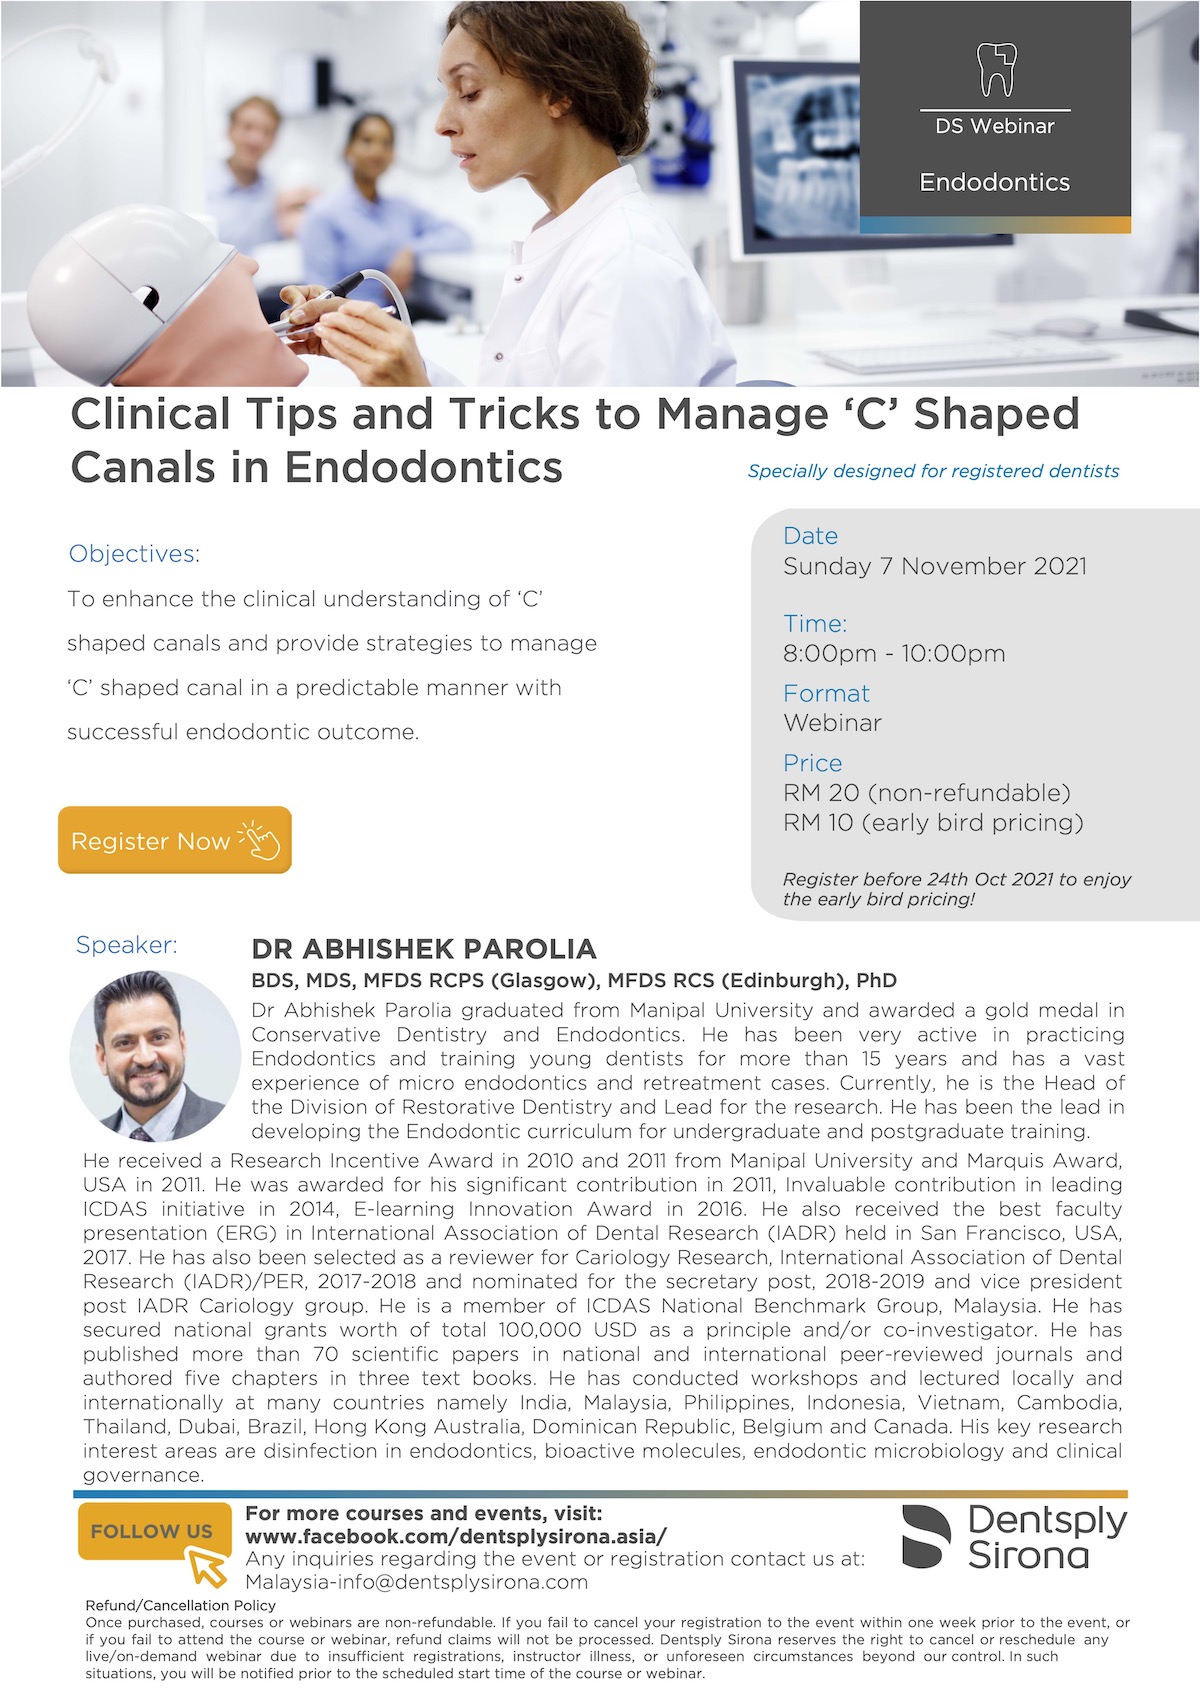 Clinical Tips and Tricks to Manage C Shaped Canals in Endodontics Flyer